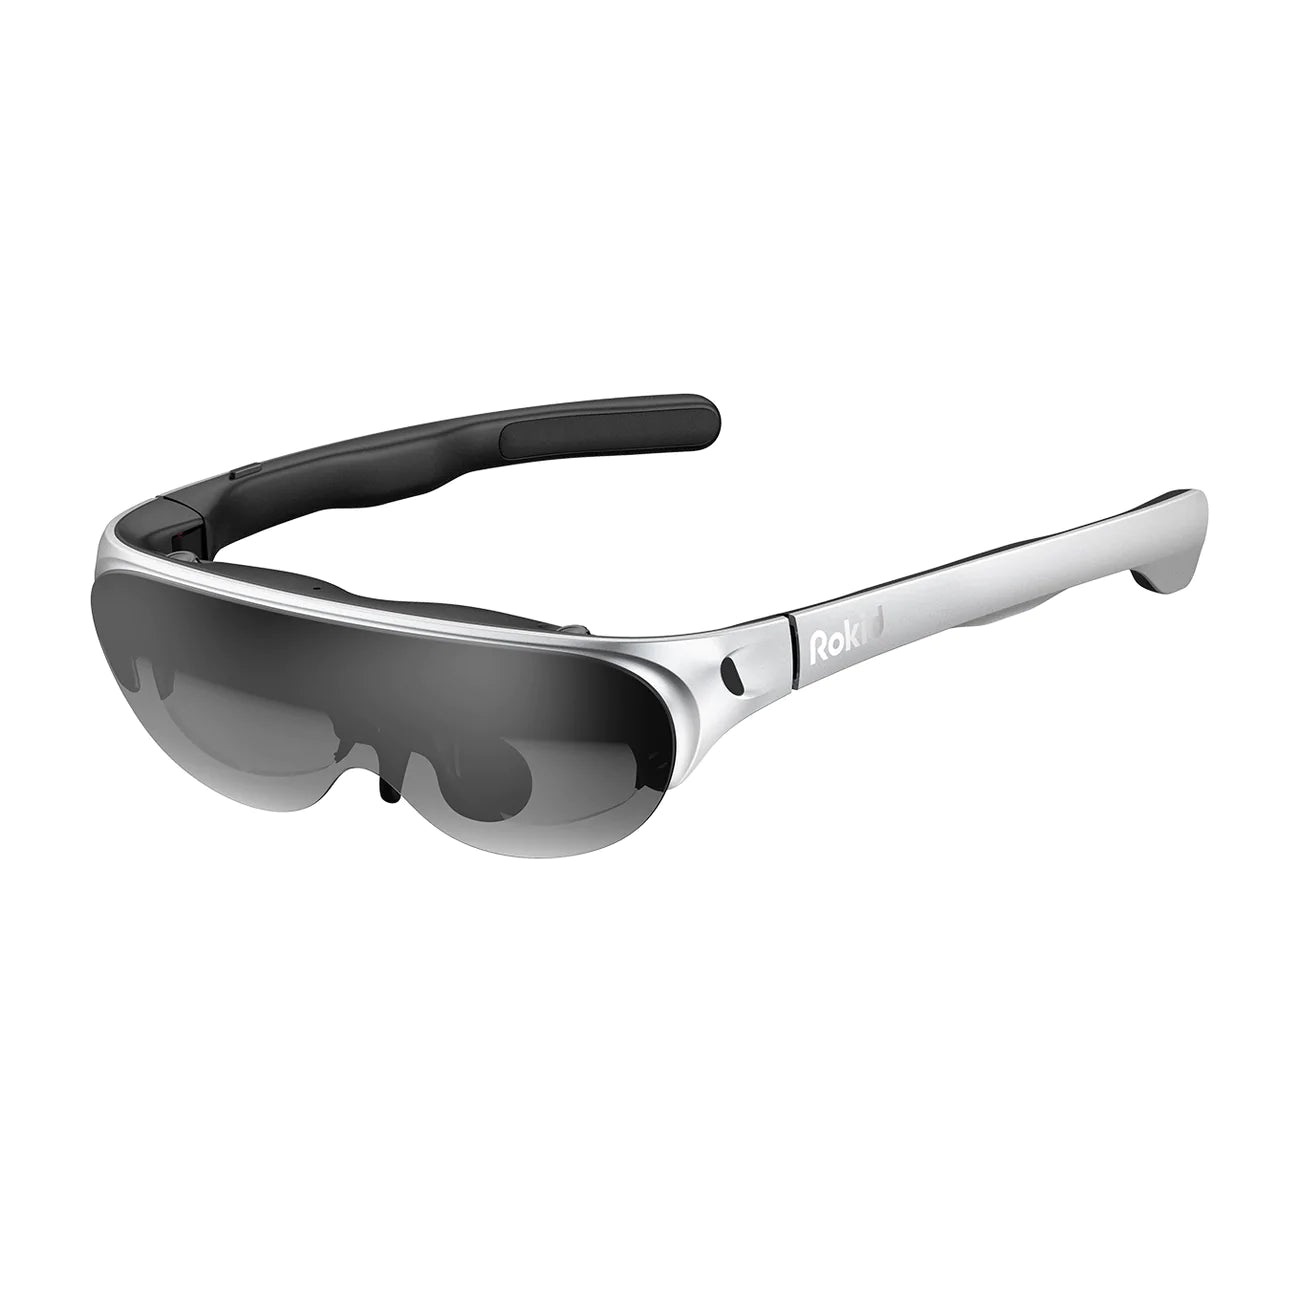 Rokid Air AR Glasses with Voice Control AI, Starry Grey